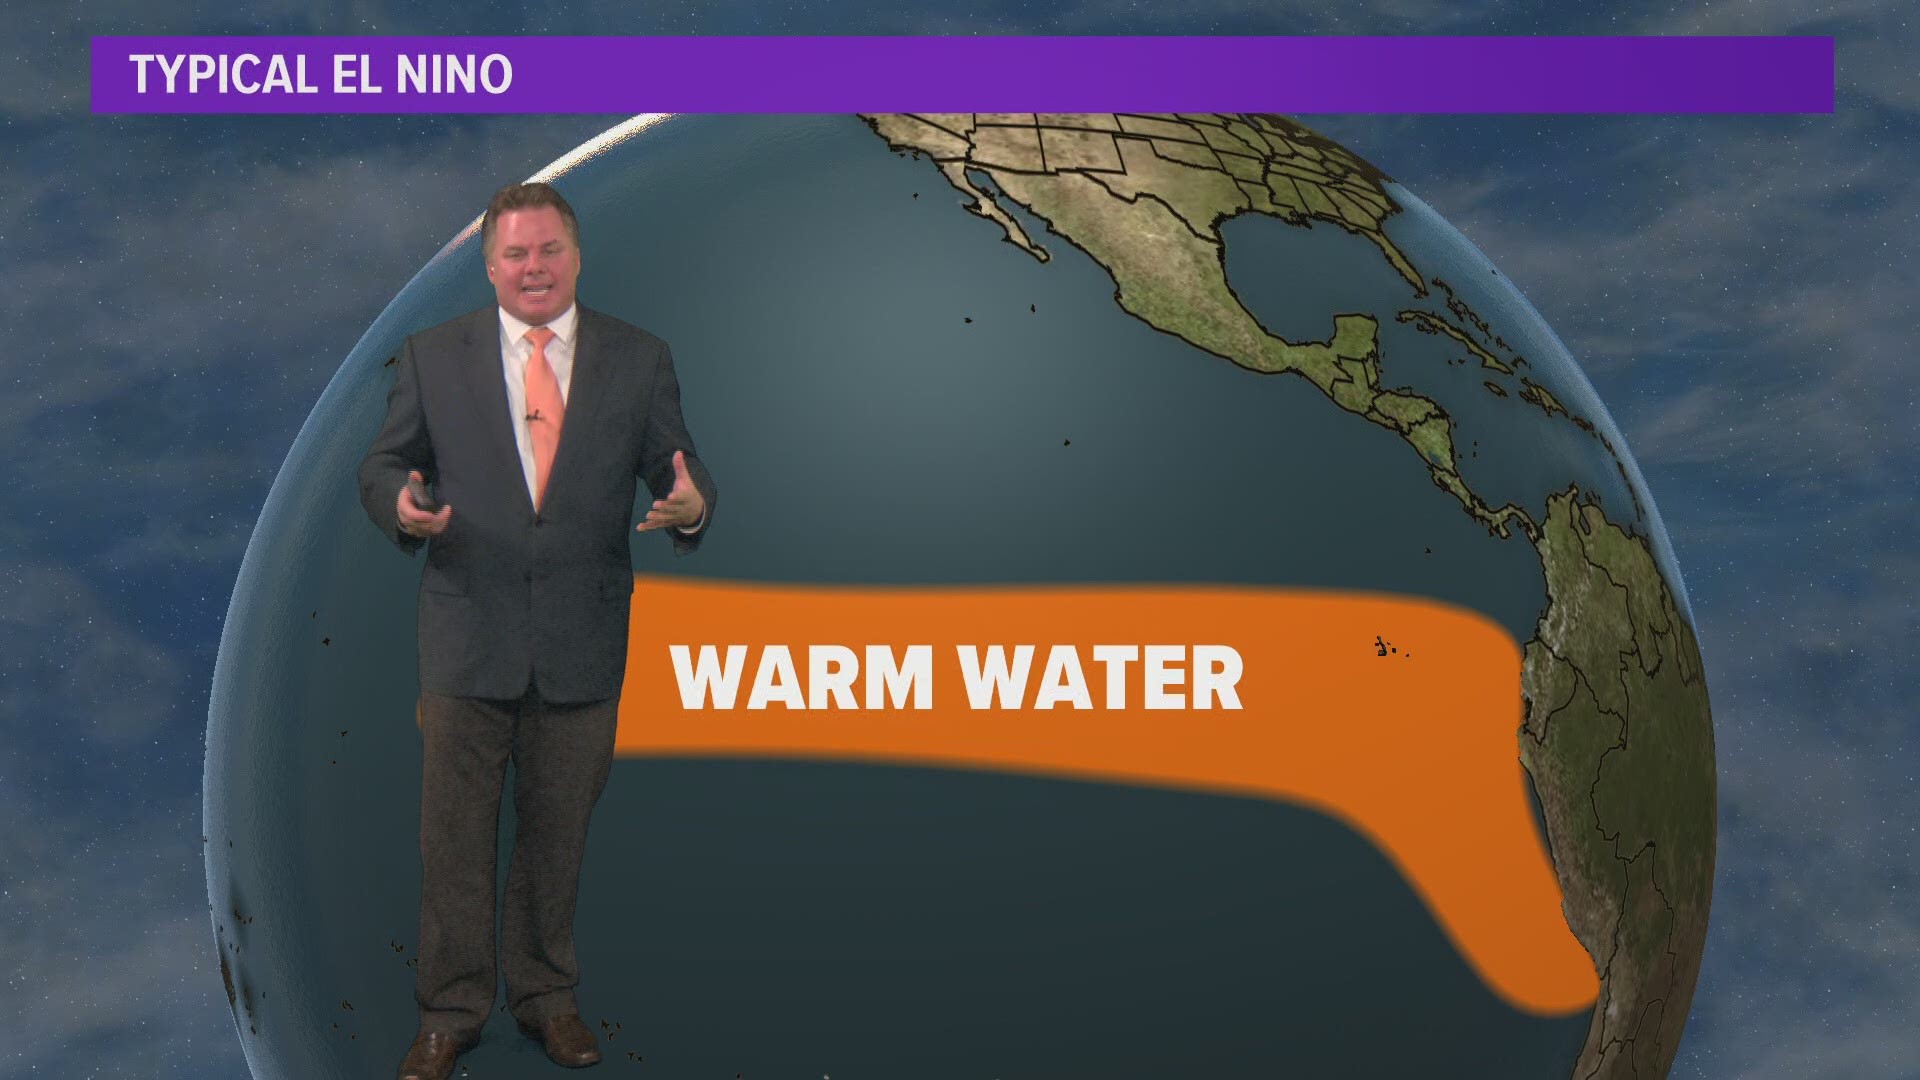 This year's El Niño could actually lead to a colder, more stormy season than usual for the Eastern U.S. Here is Patrick Hammer to further explains